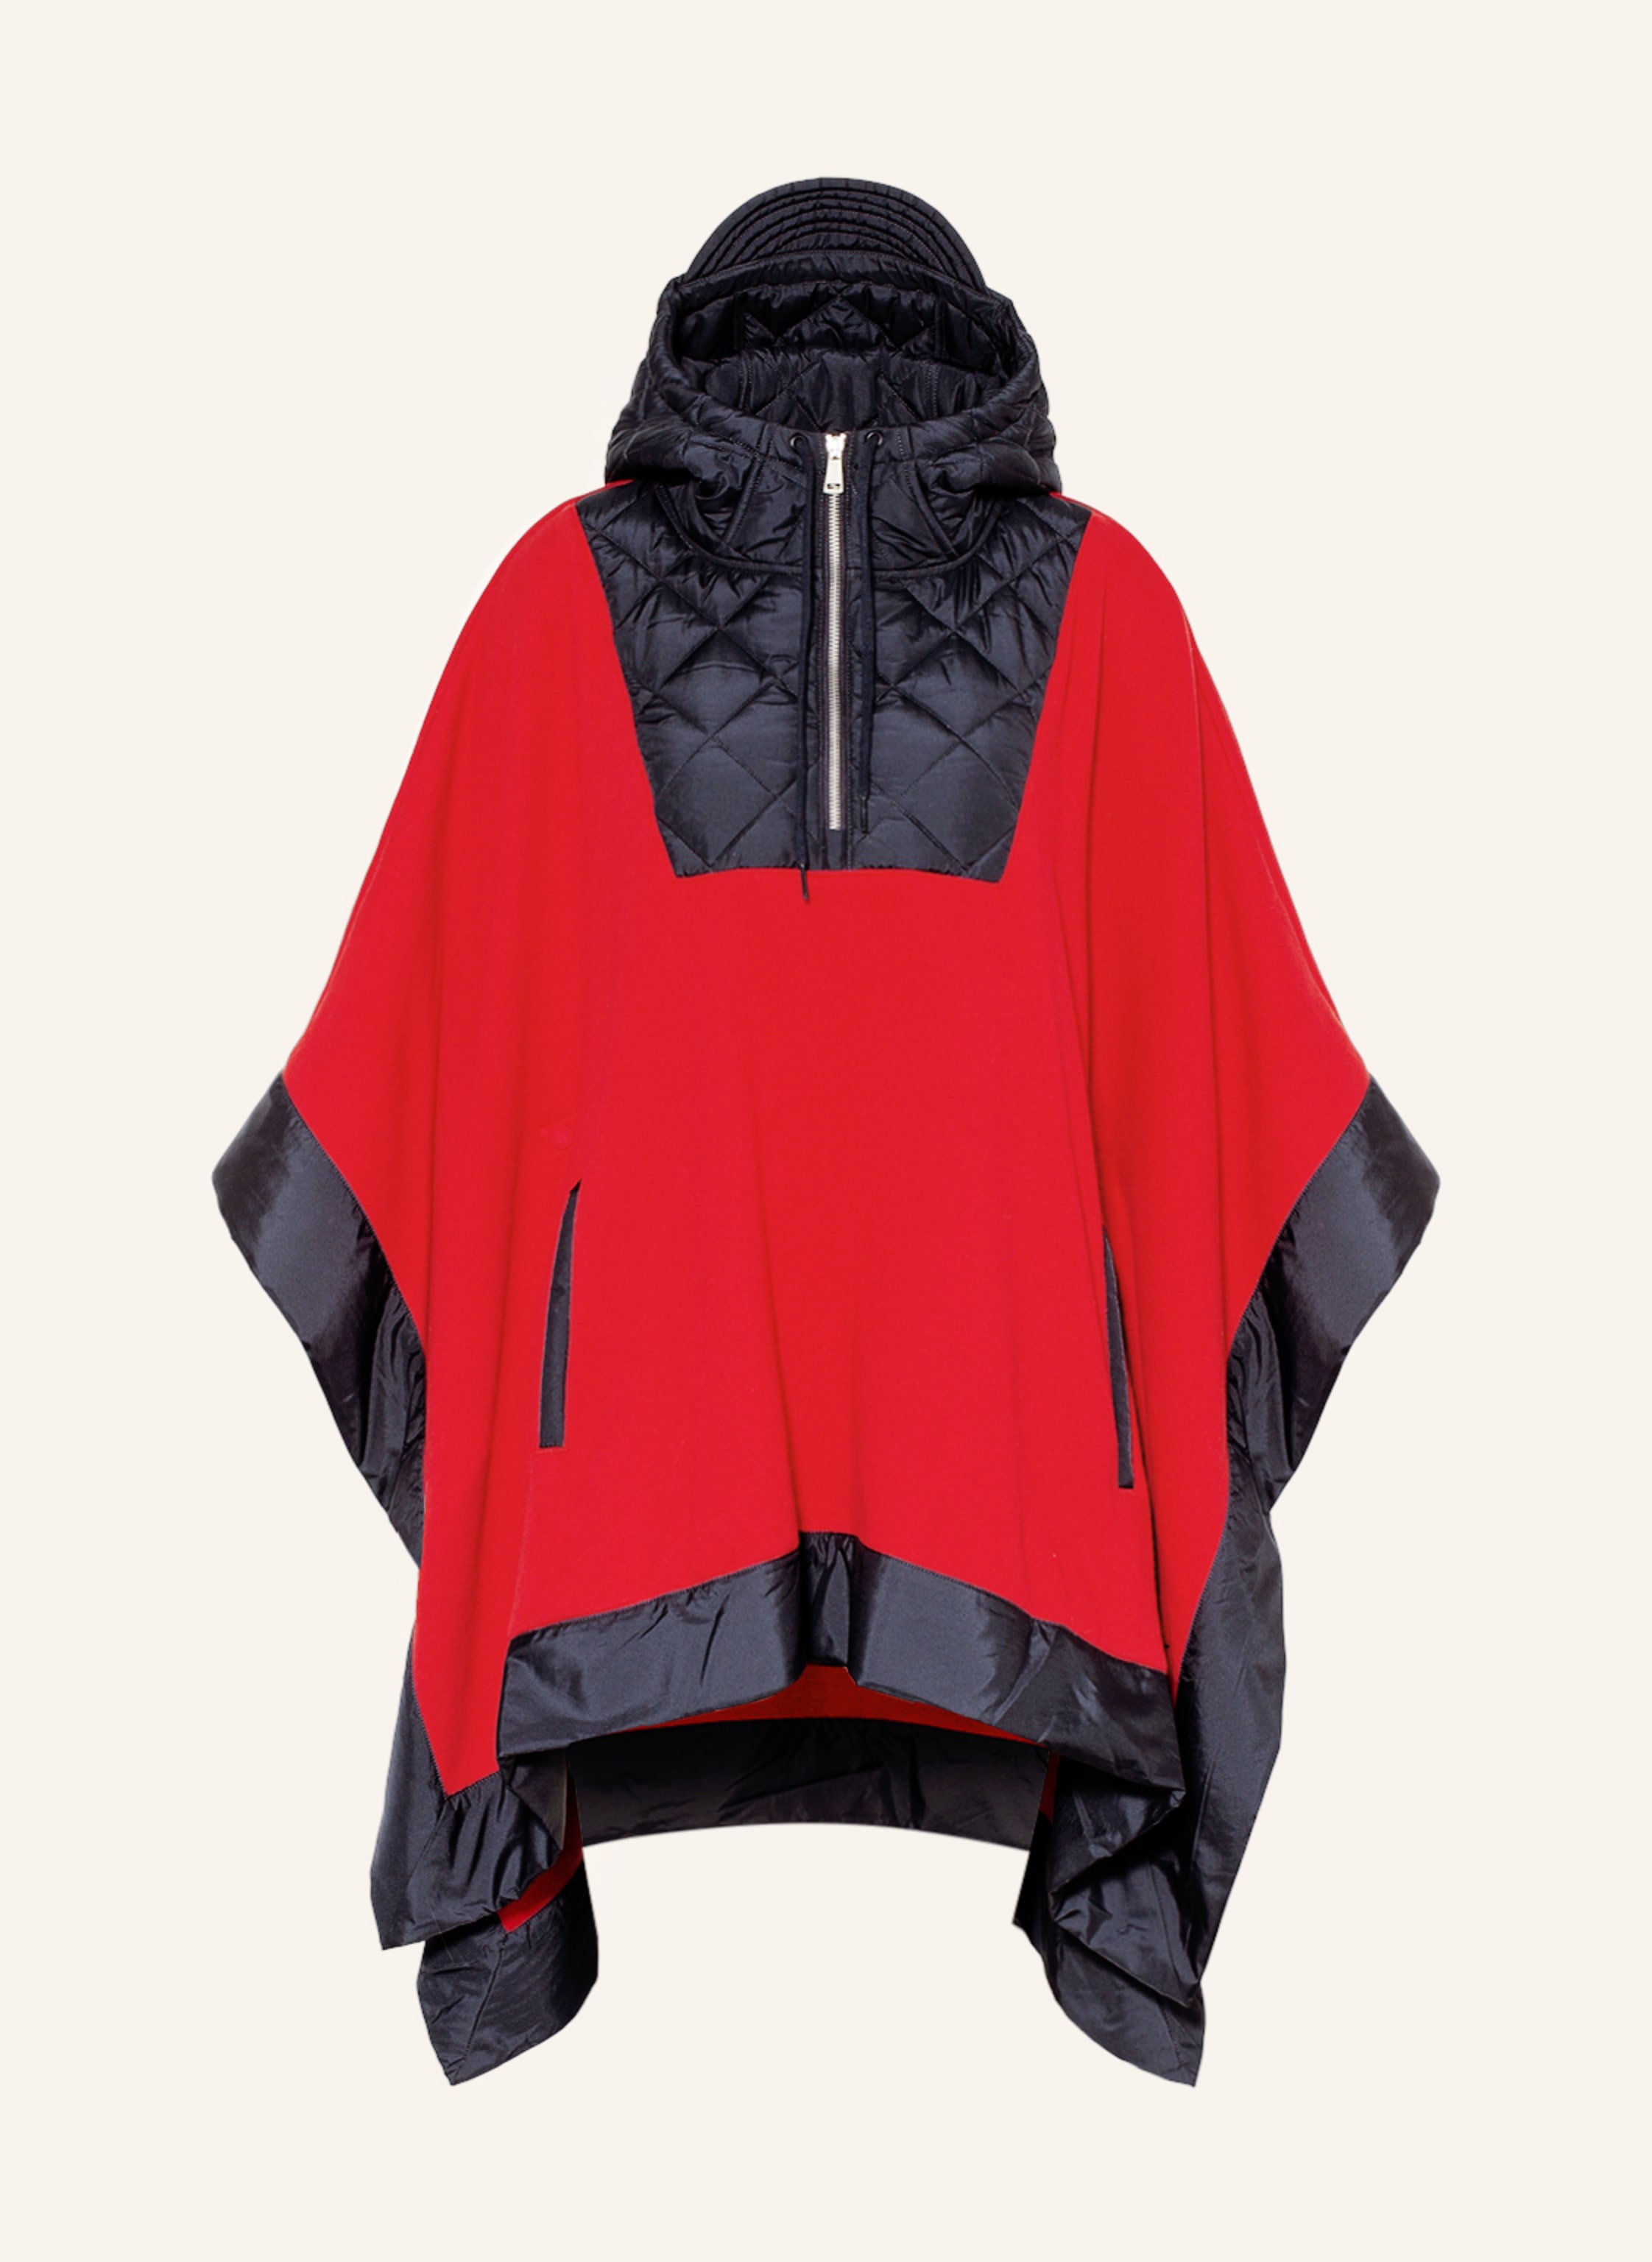 POLO RALPH LAUREN Poncho in mixed materials in red/ blue | Breuninger